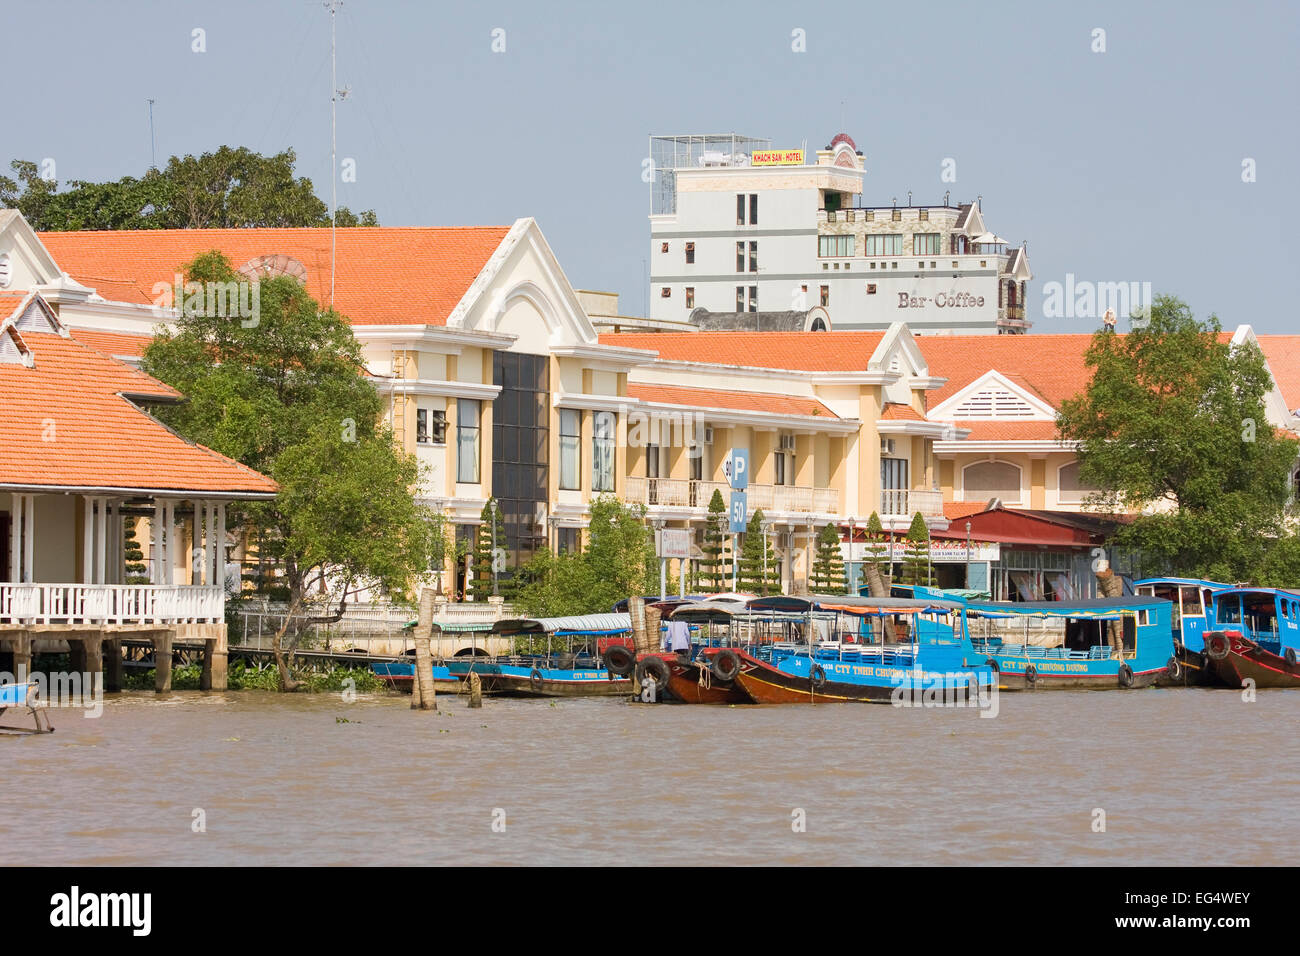 Excursion boats in the port of Cai be, on the Mekong River, Mekong Delta, Vietnam, Asia Stock Photo